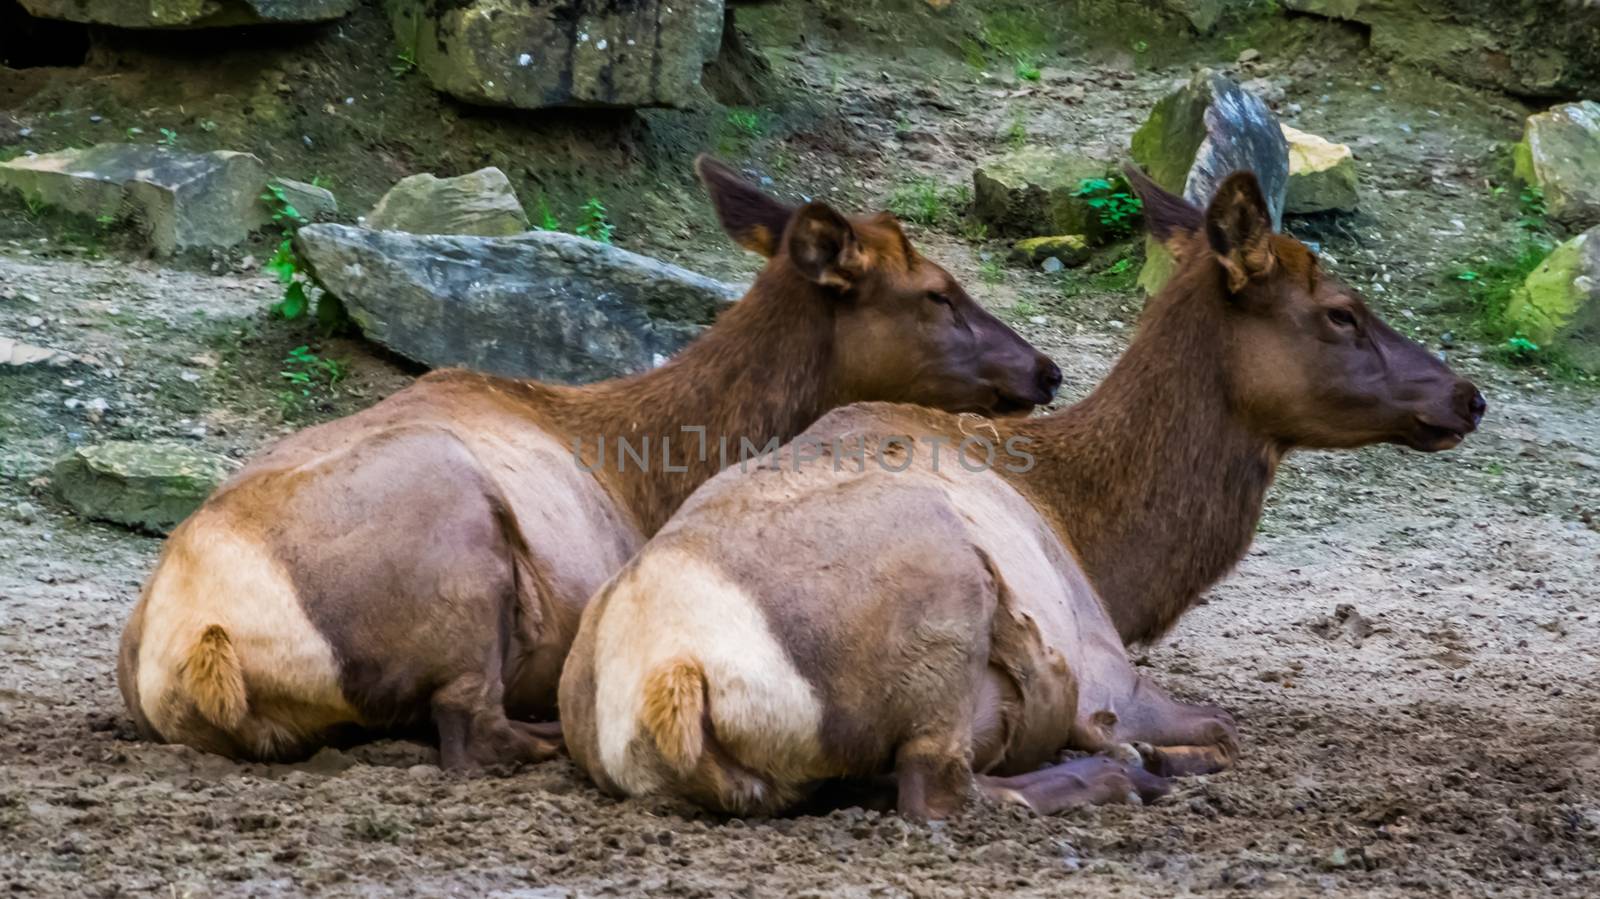 female wapiti couple sitting together on the ground, tropical deer specie from America by charlottebleijenberg